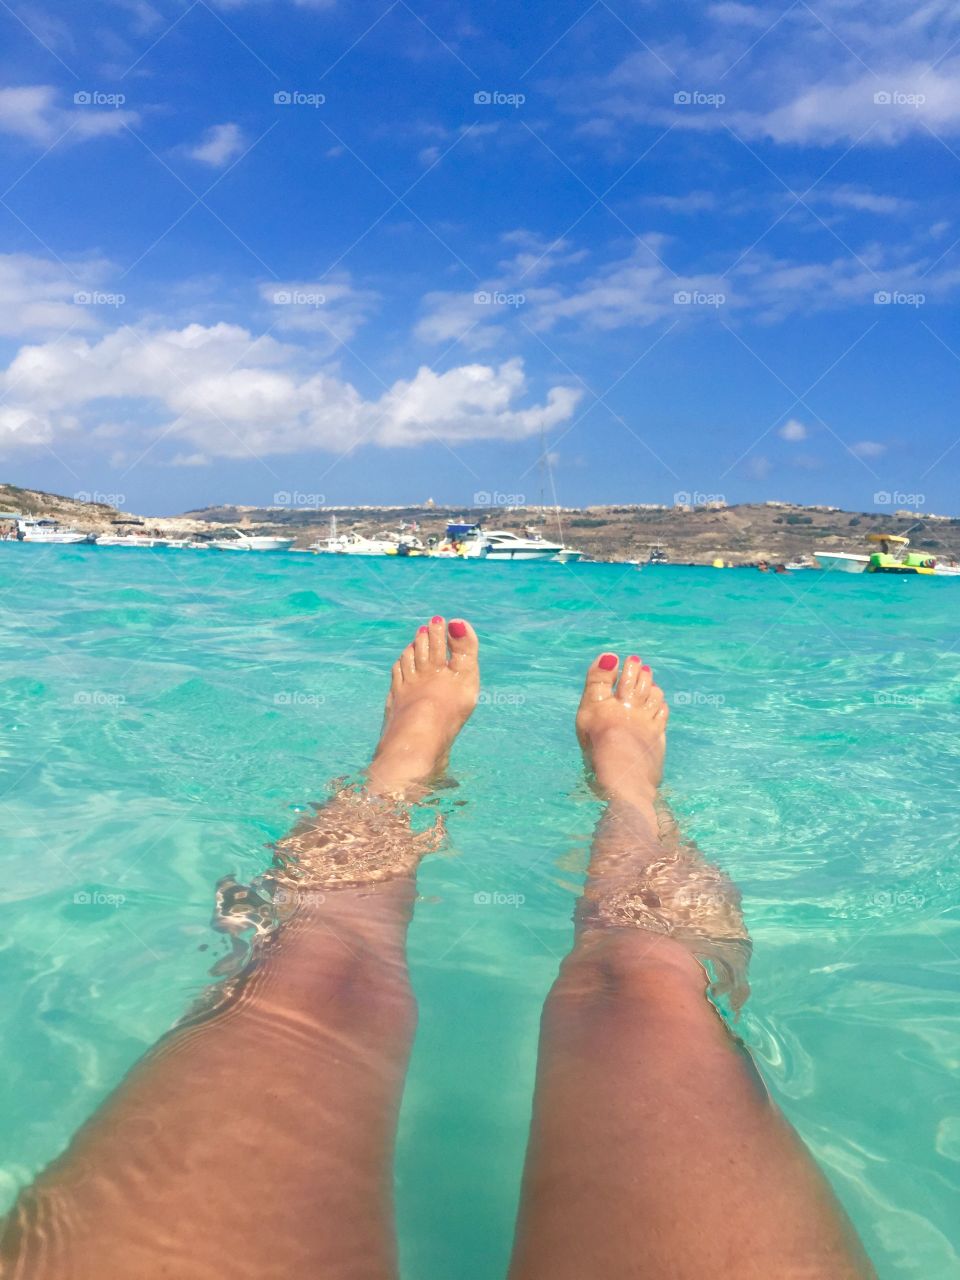 Relaxing. Floating in the crystal blue waters at Comino